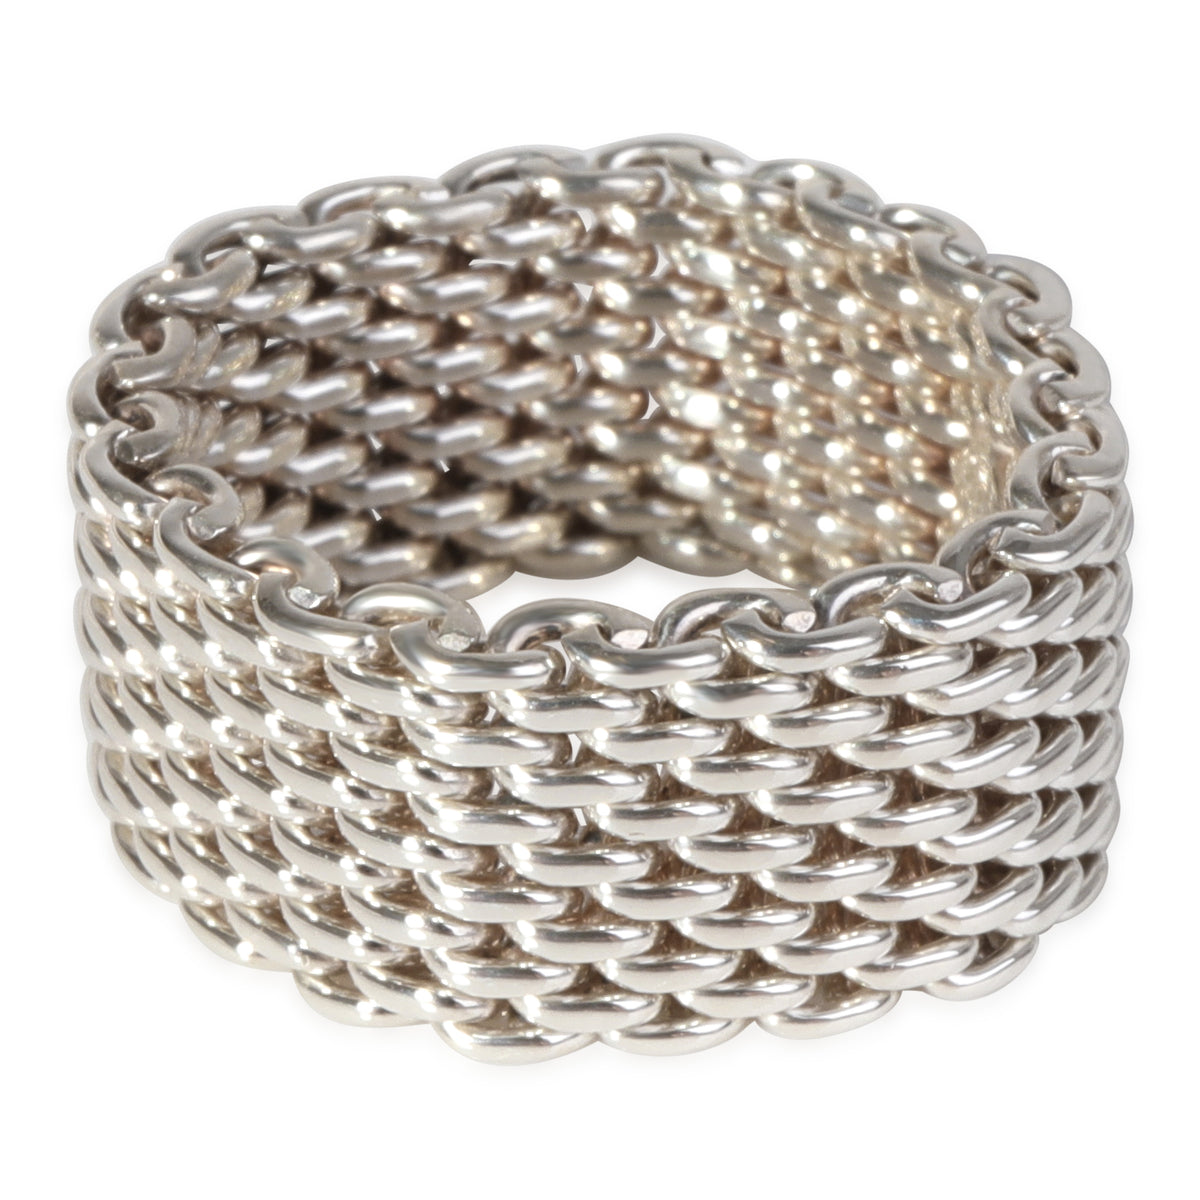 Tiffany & Co. Somerset Mesh Ring in Sterling Silver